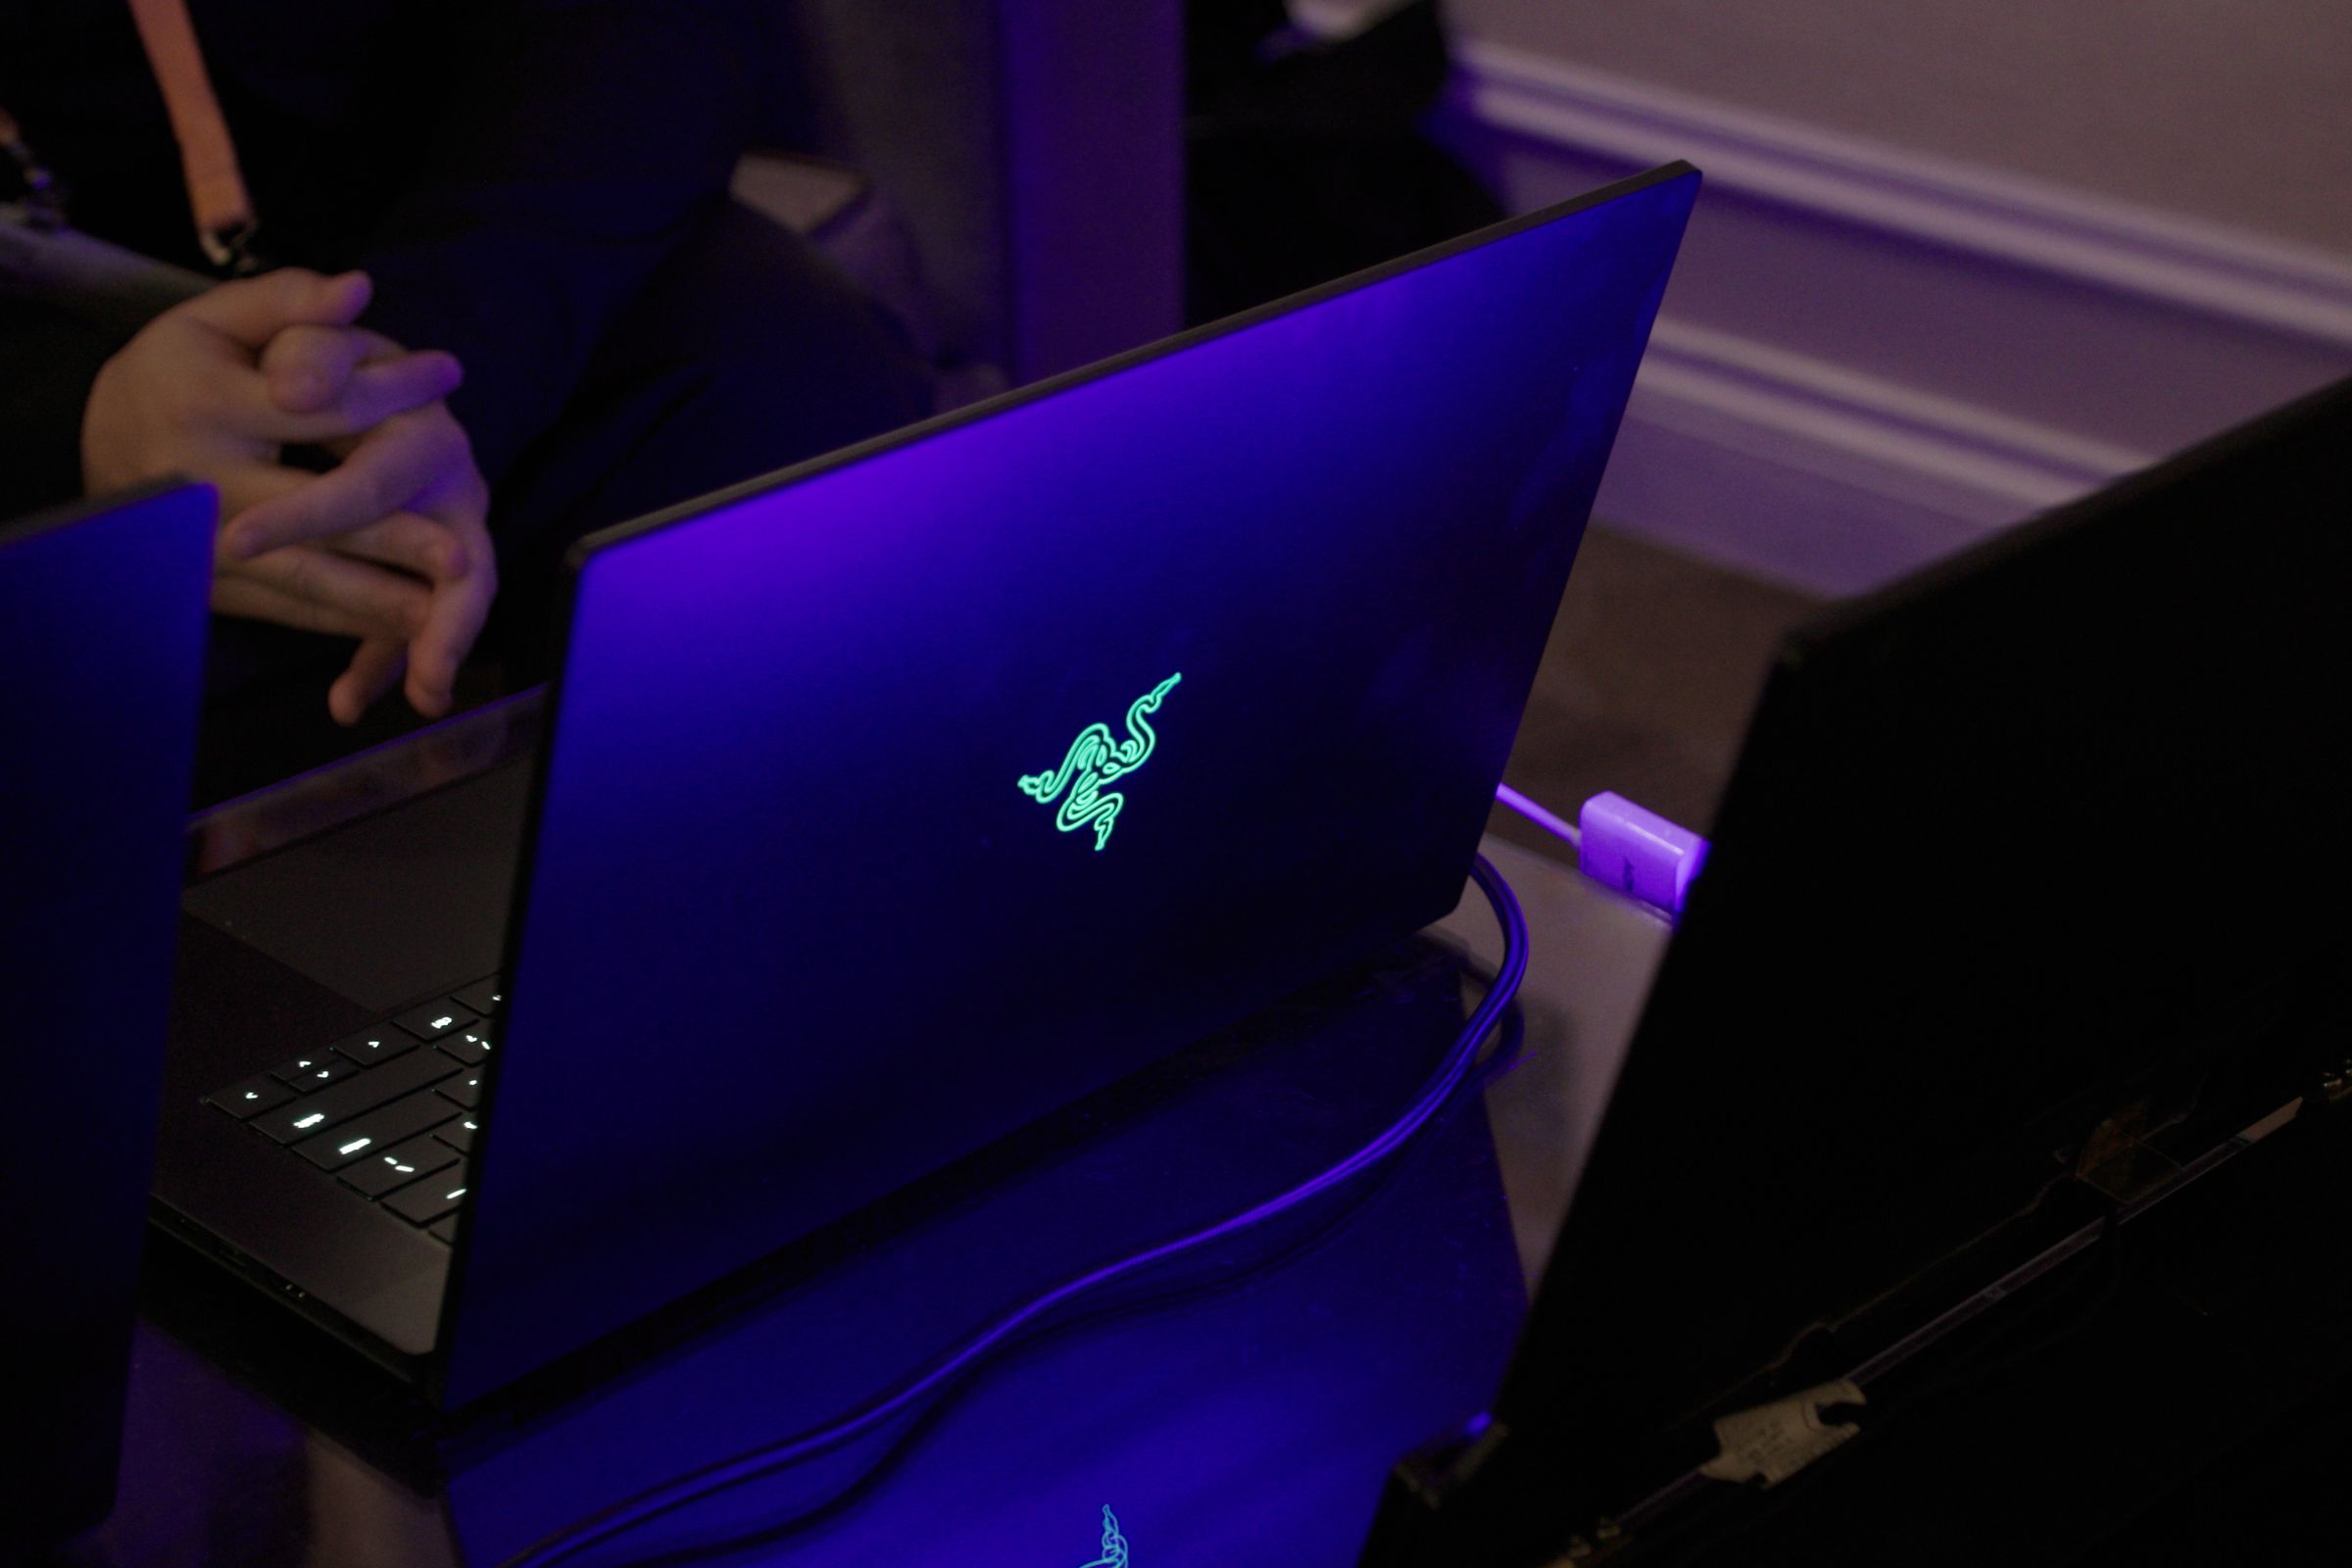 The Razer Blade 16 seen from the back on a dark table.